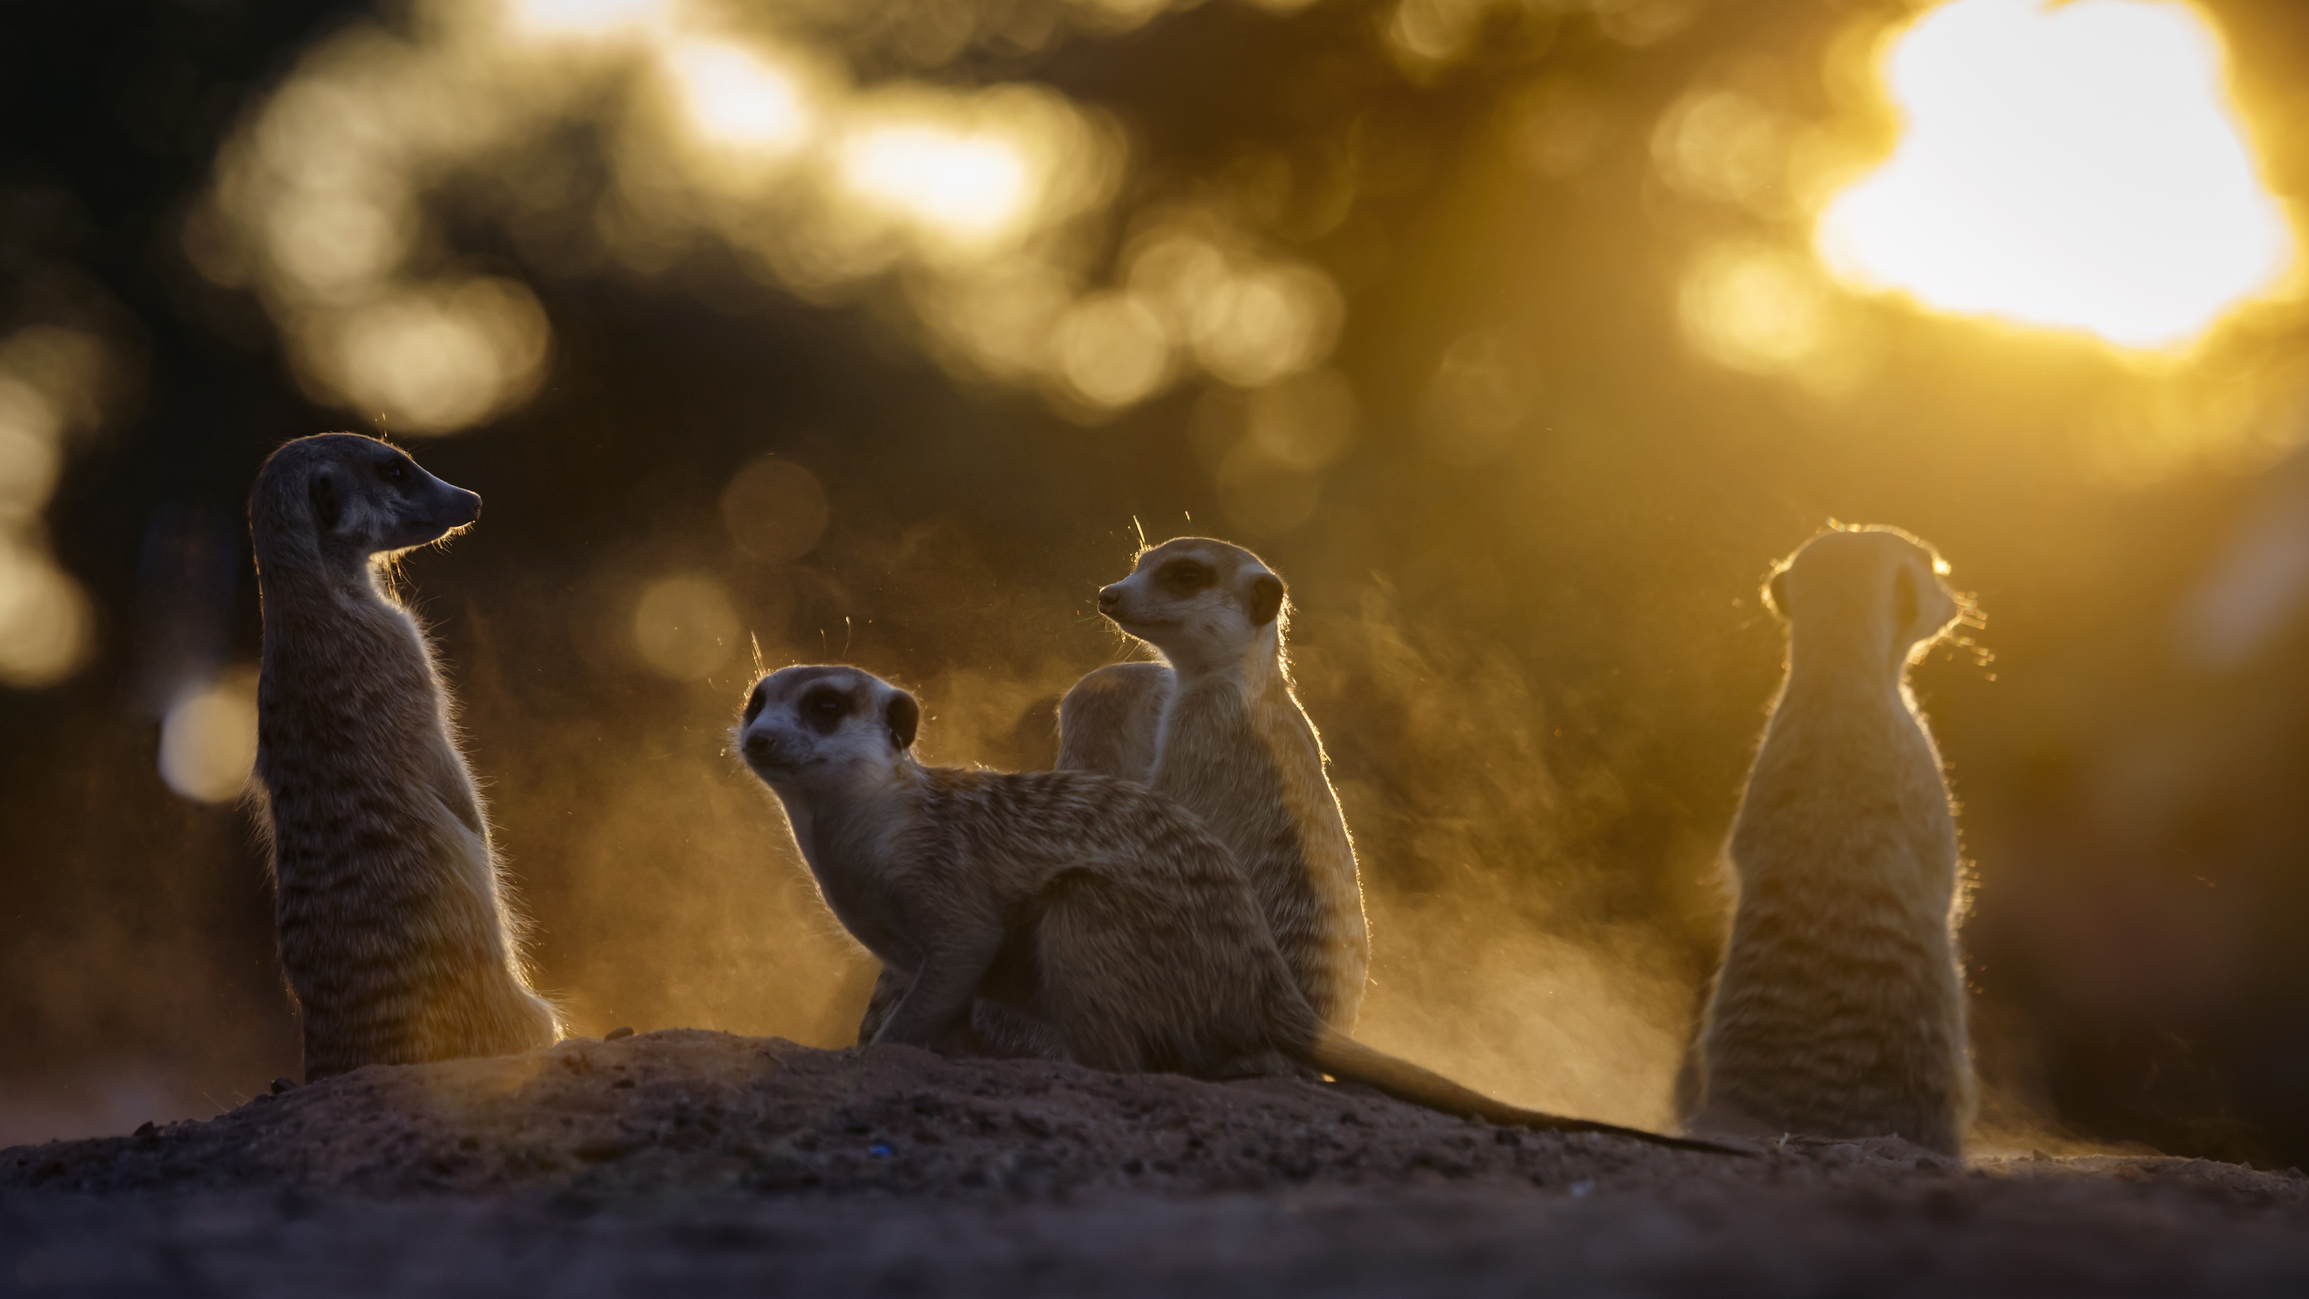 Meerkat family emerging from the burrow at sunrise